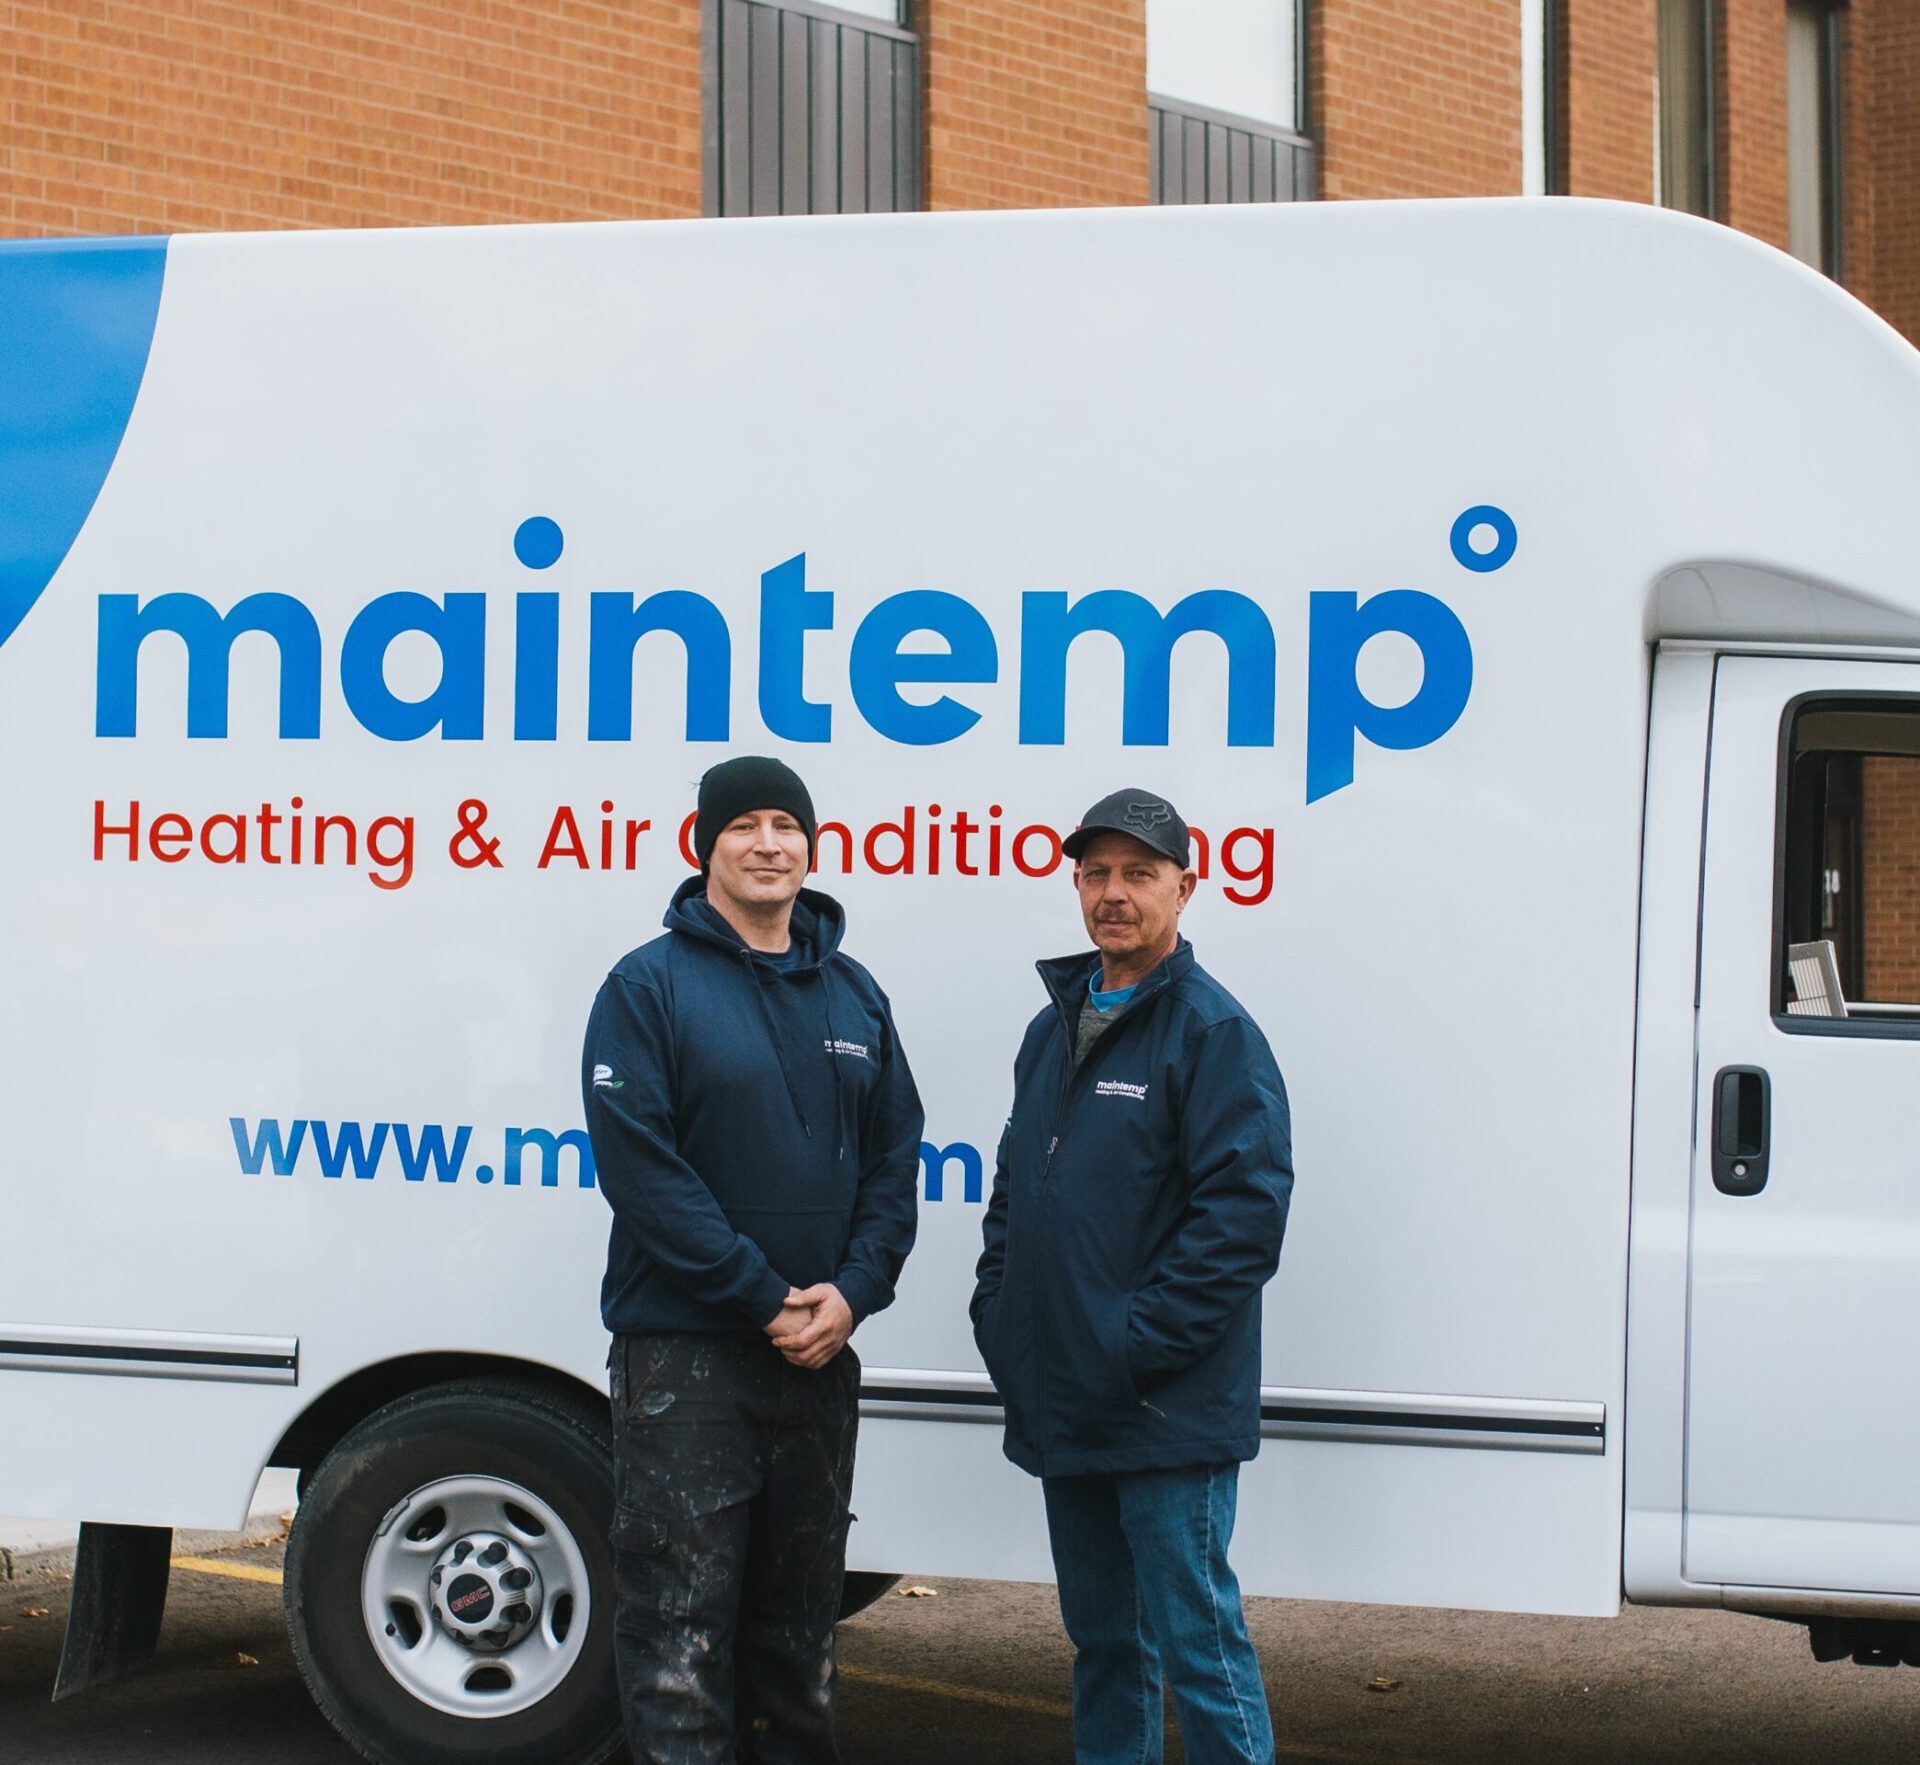 Two people are standing in front of a white van with "maintemp Heating & Air Conditioning" branding, wearing company jackets, smiling, and looking at the camera.